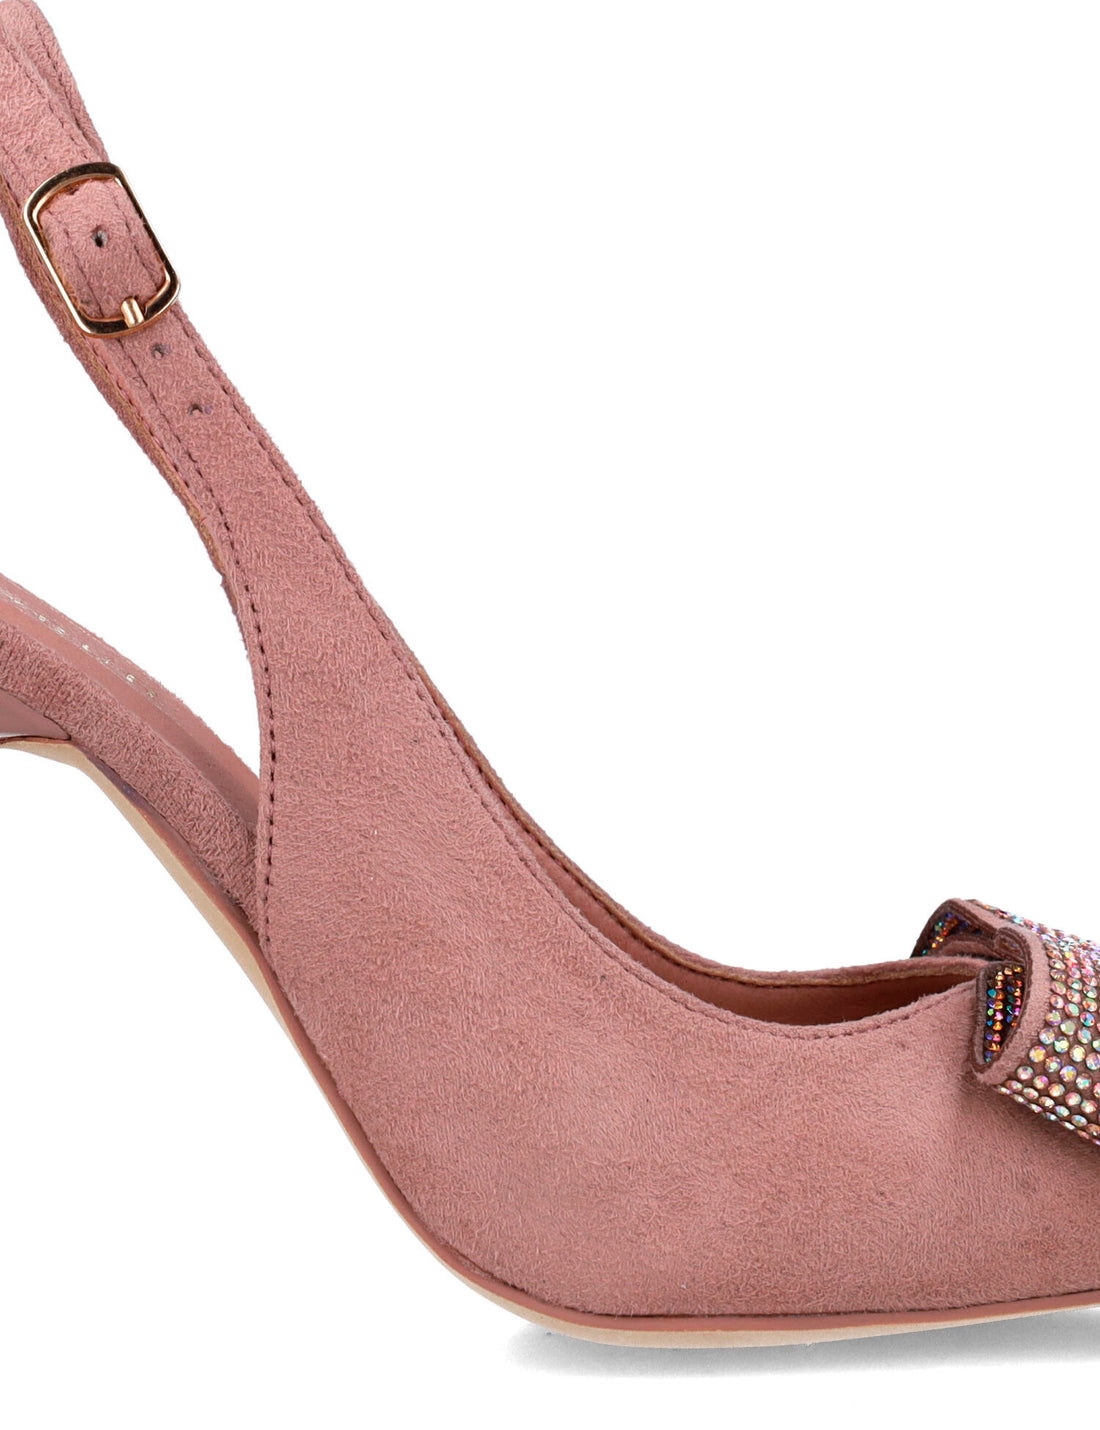 Pink Slingback Pumps With Embellished Bow_25445_97_01